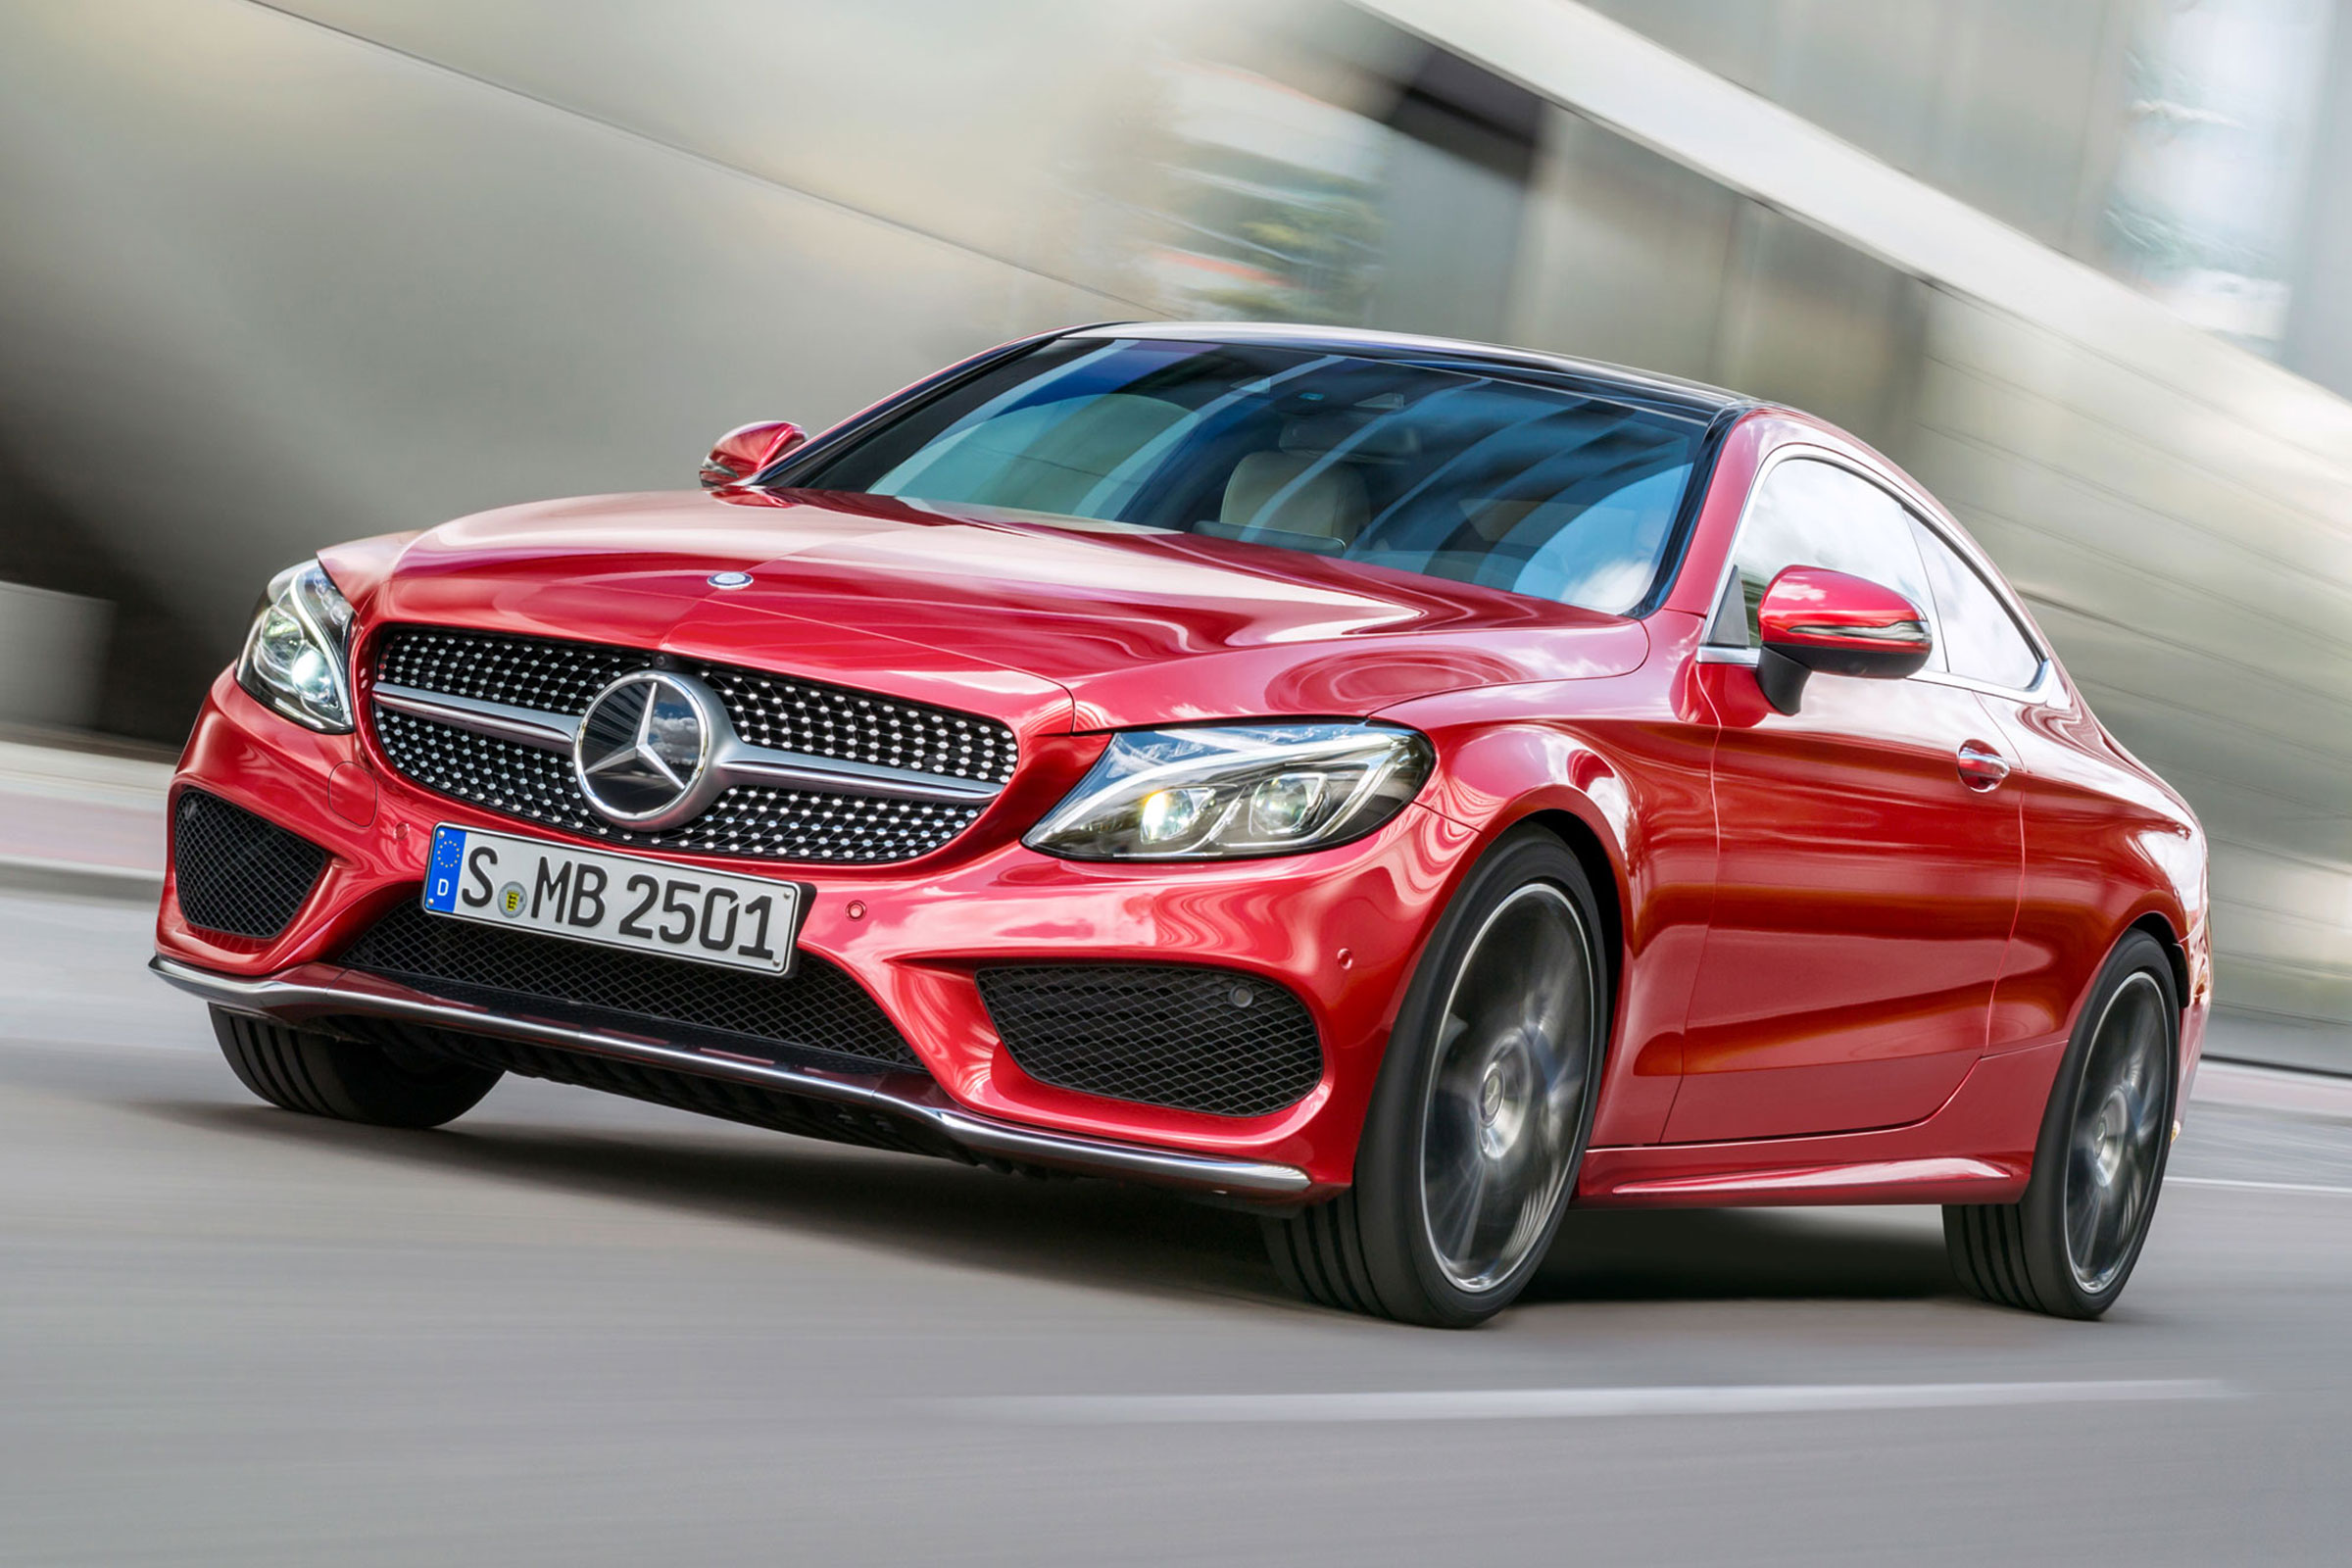 Full Price List For Mercedes C Class Coupe Revealed Carbuyer